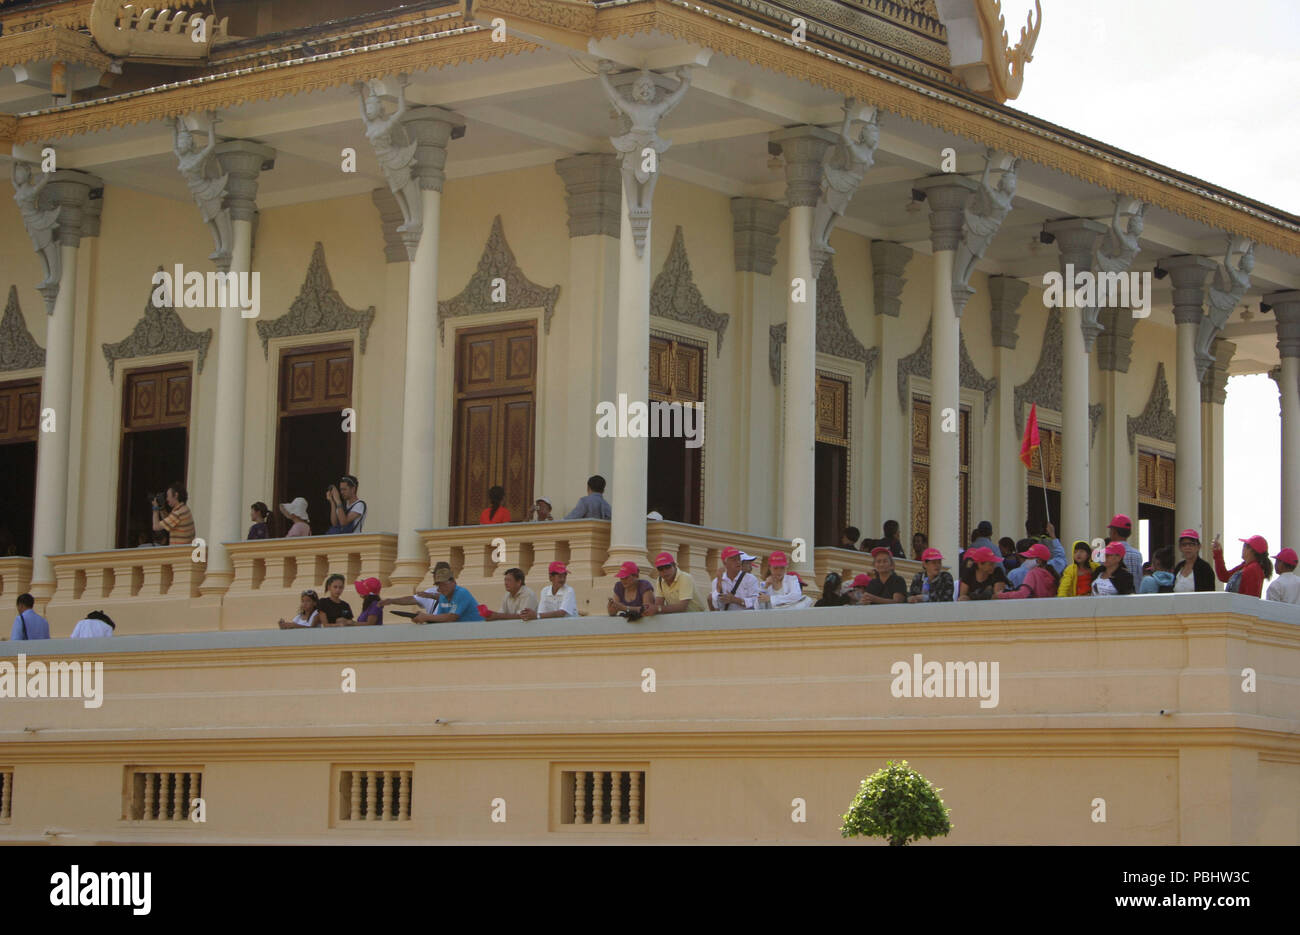 Lots of Tourists Wearing Red Hats on Balcony Looking Out, Royal Palace, Phnom Penh, Cambodia Stock Photo